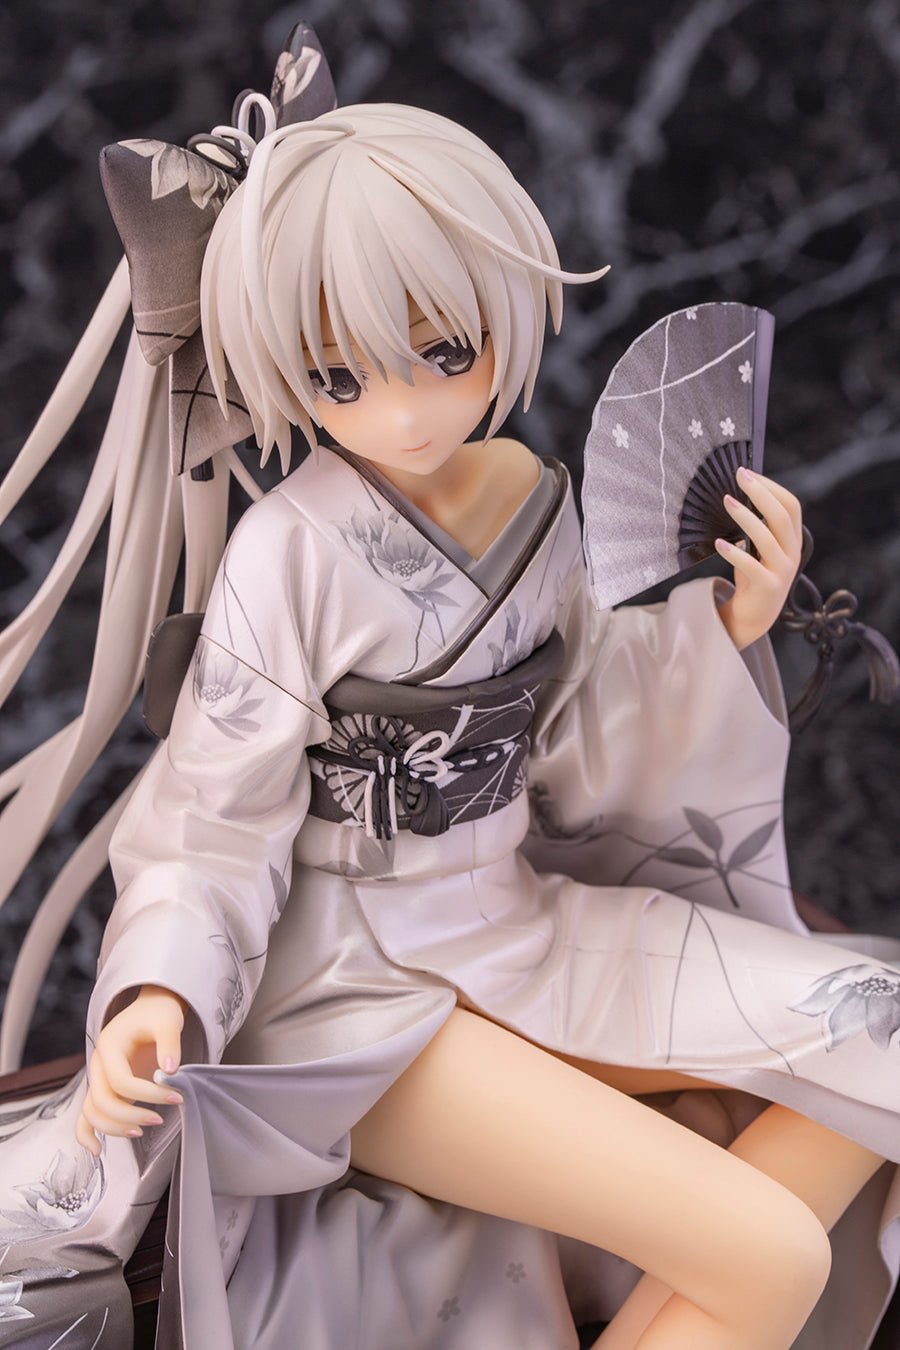 Yosuga no Sora Art Book Anime Colorful Artbook Limited Edition Collector's  Edition Picture Album Paintings - AliExpress